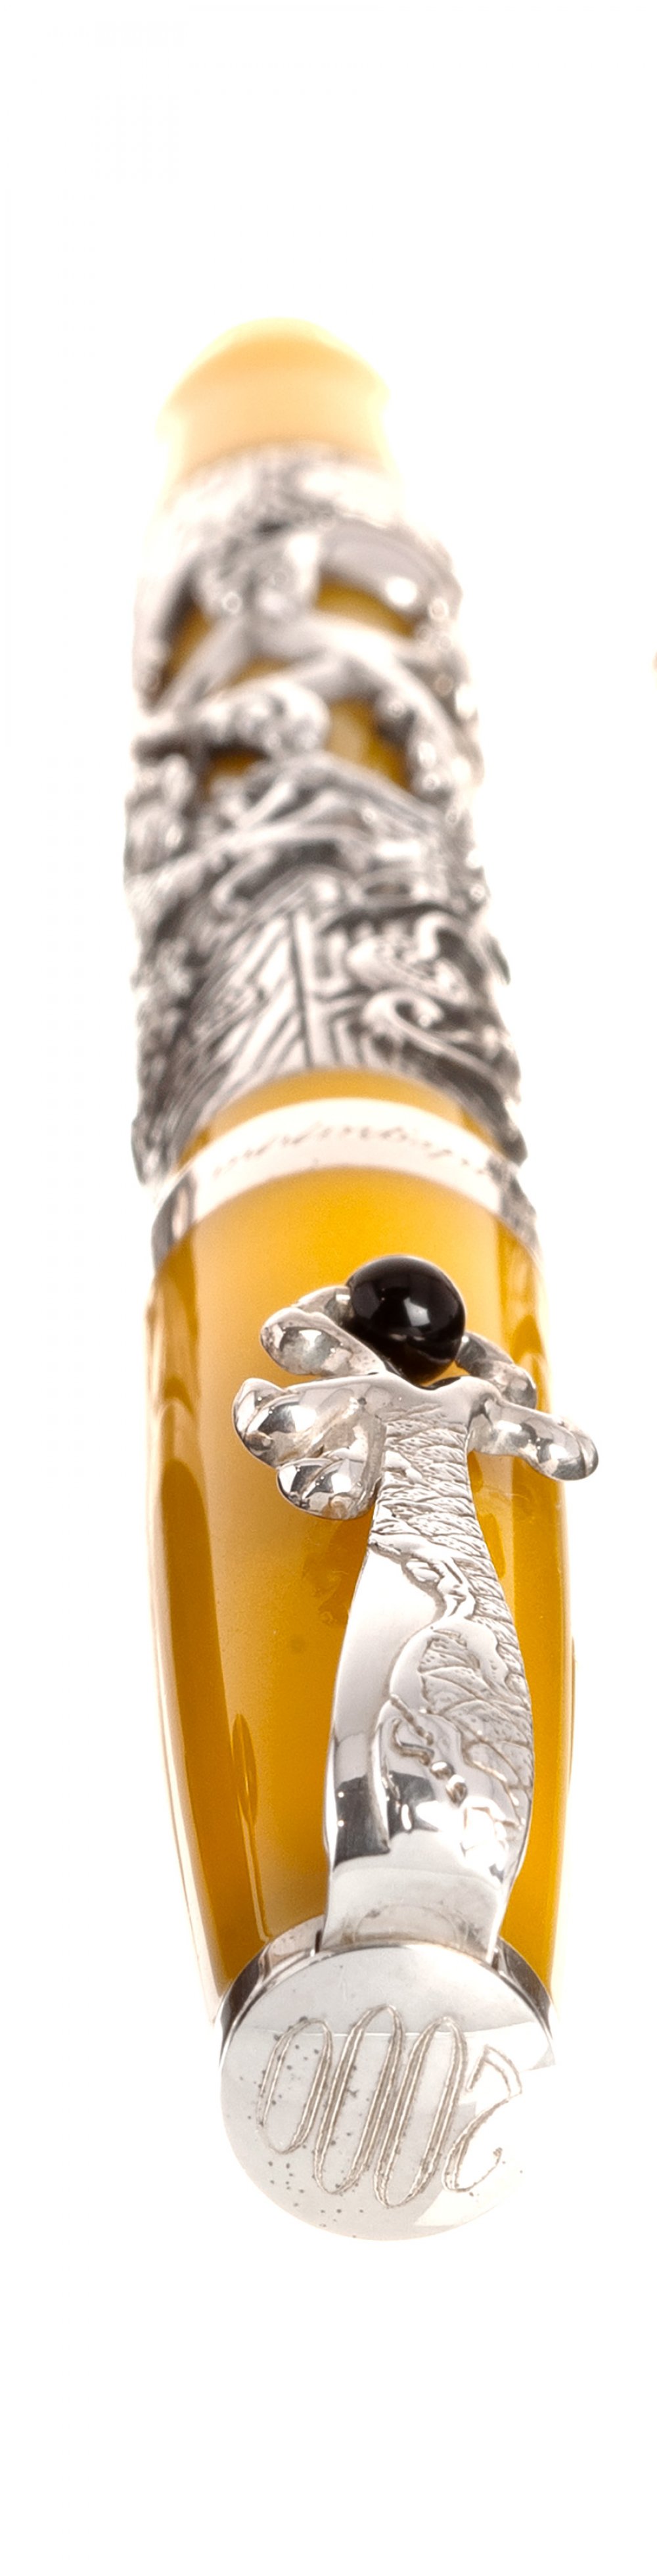 MONTEGRAPPA FOUNTAIN PEN "ZODIAC".Yellow resin barrel with silver case with dragon.Limited edition. - Image 2 of 4